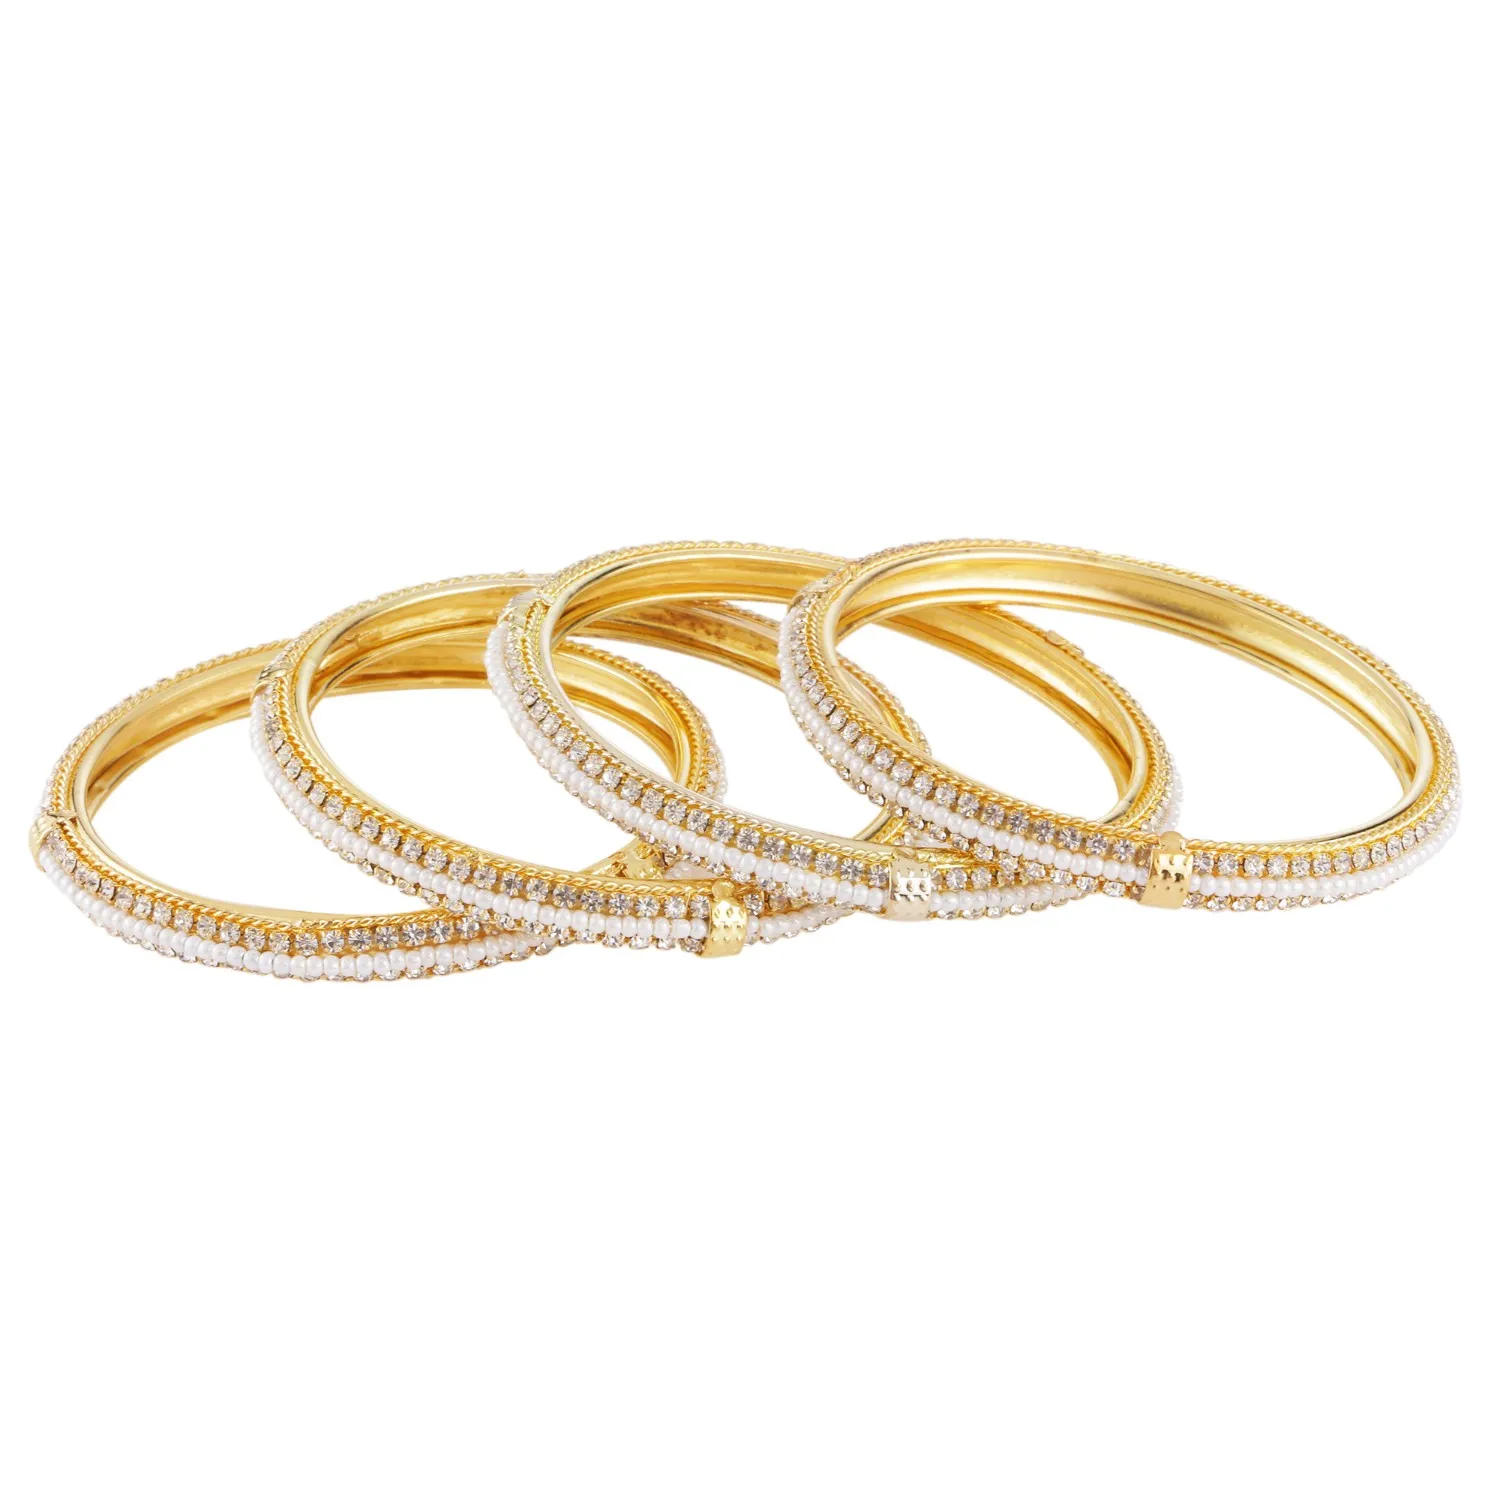 New Bollywood Party Wear Costume Jewellery Bangle Set 4 Piece In Gold Tone .... 